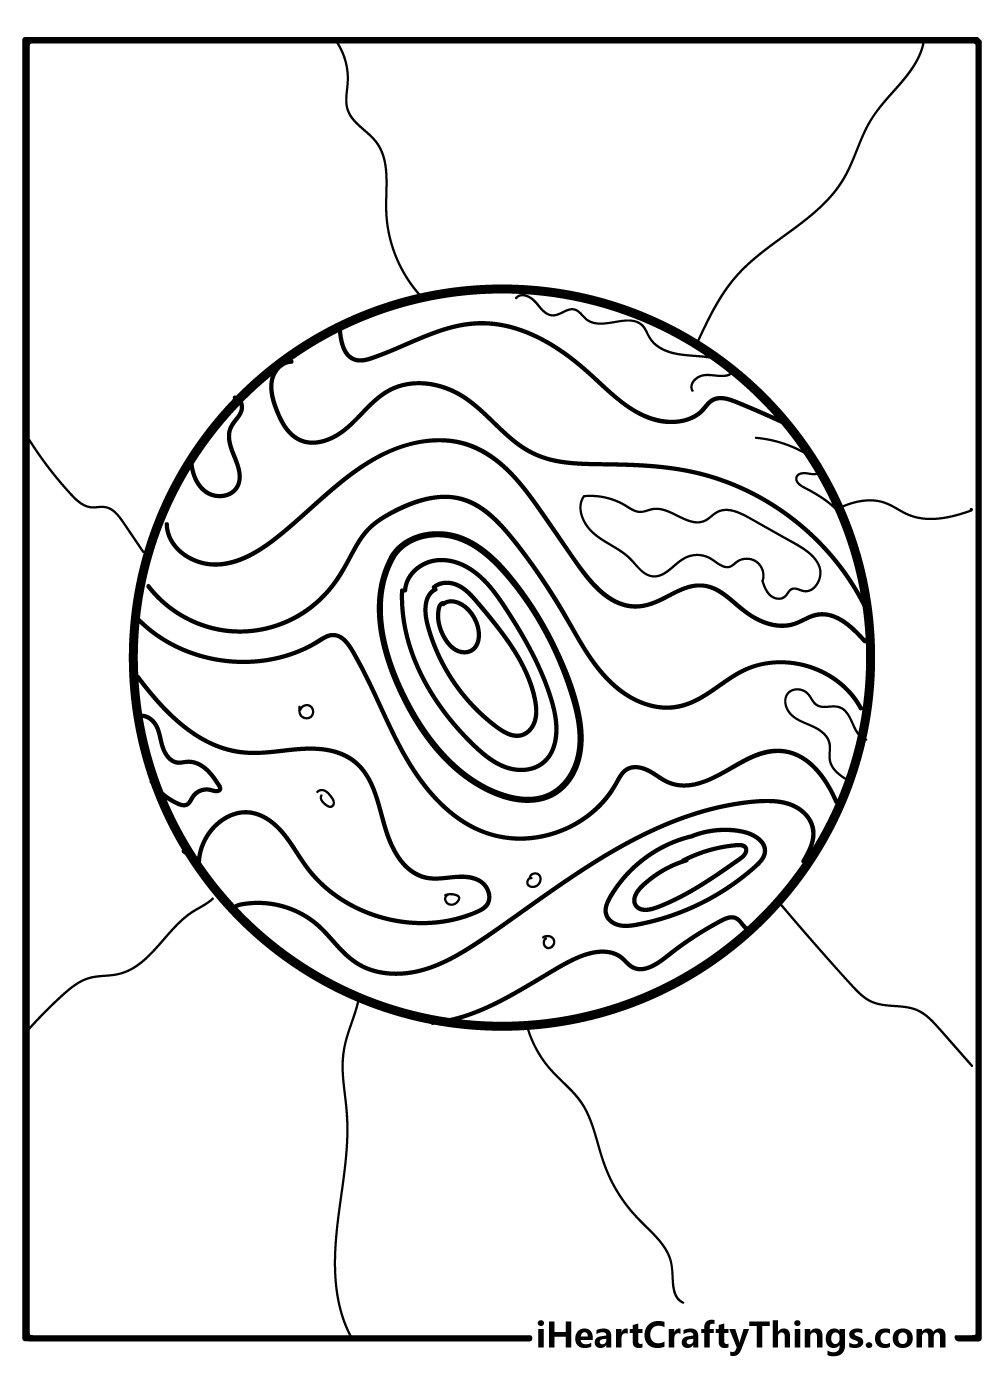 Planets Coloring Pages for preschoolers free printable